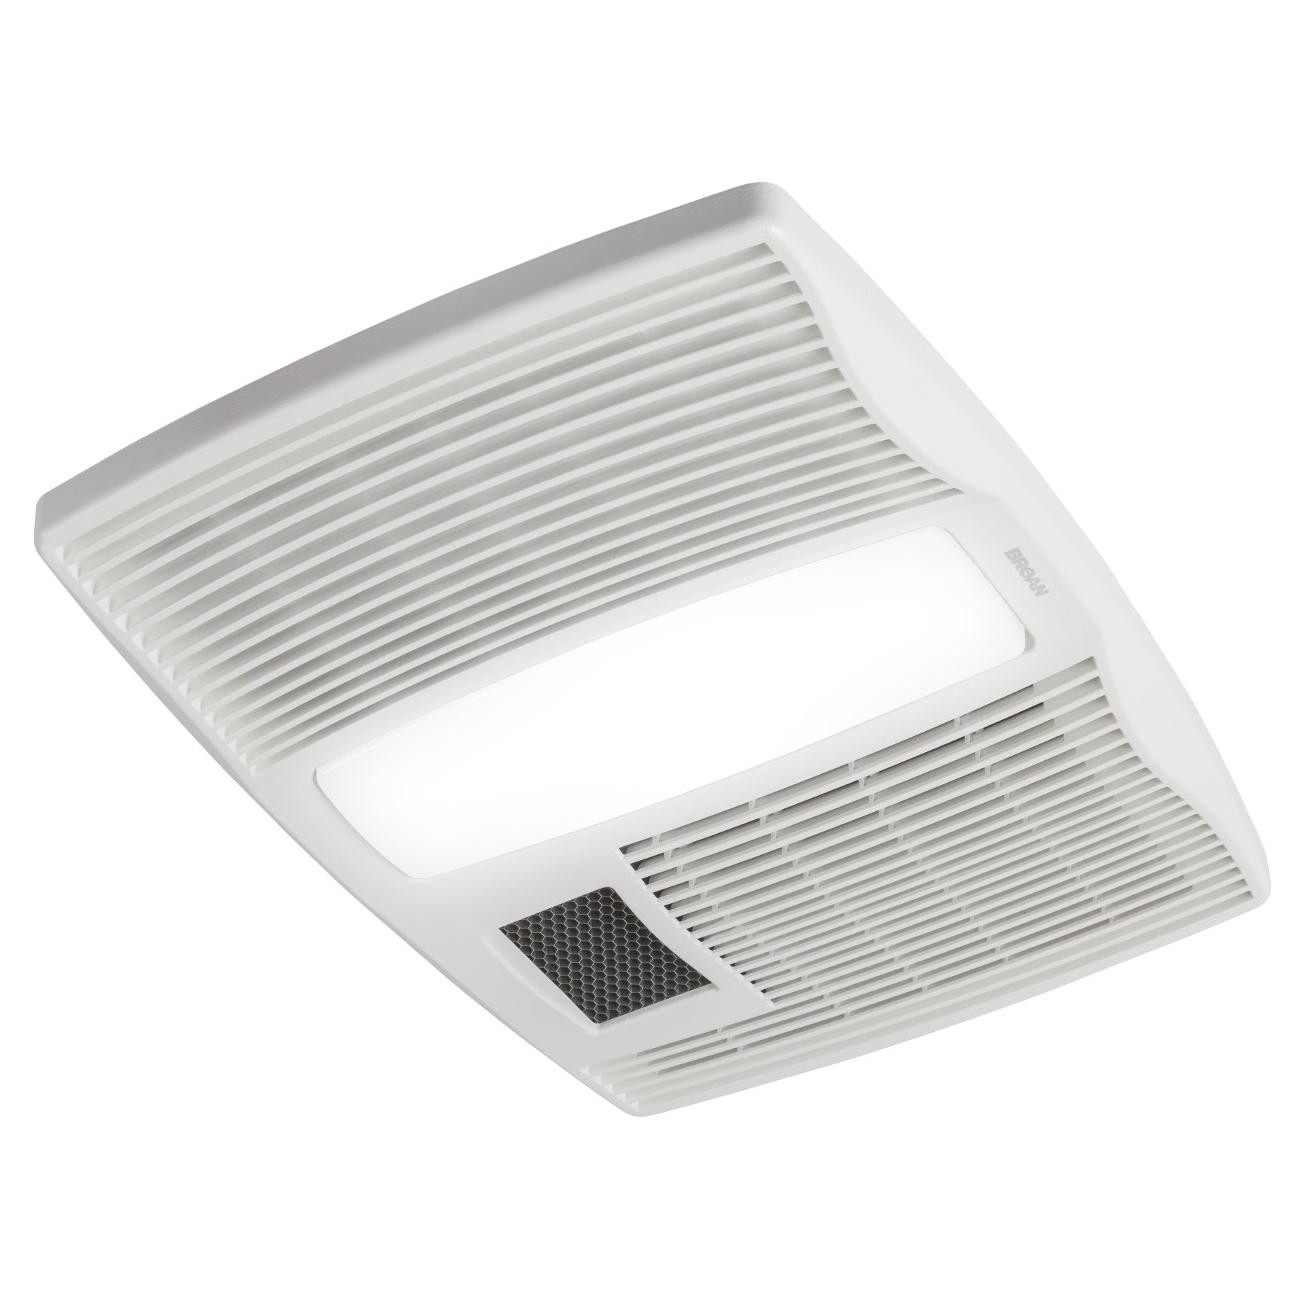 Bathroom Exhaust Fan With Heater
 Broan Nutone QTX110HL Very Quiet Ceiling Heater Fan and